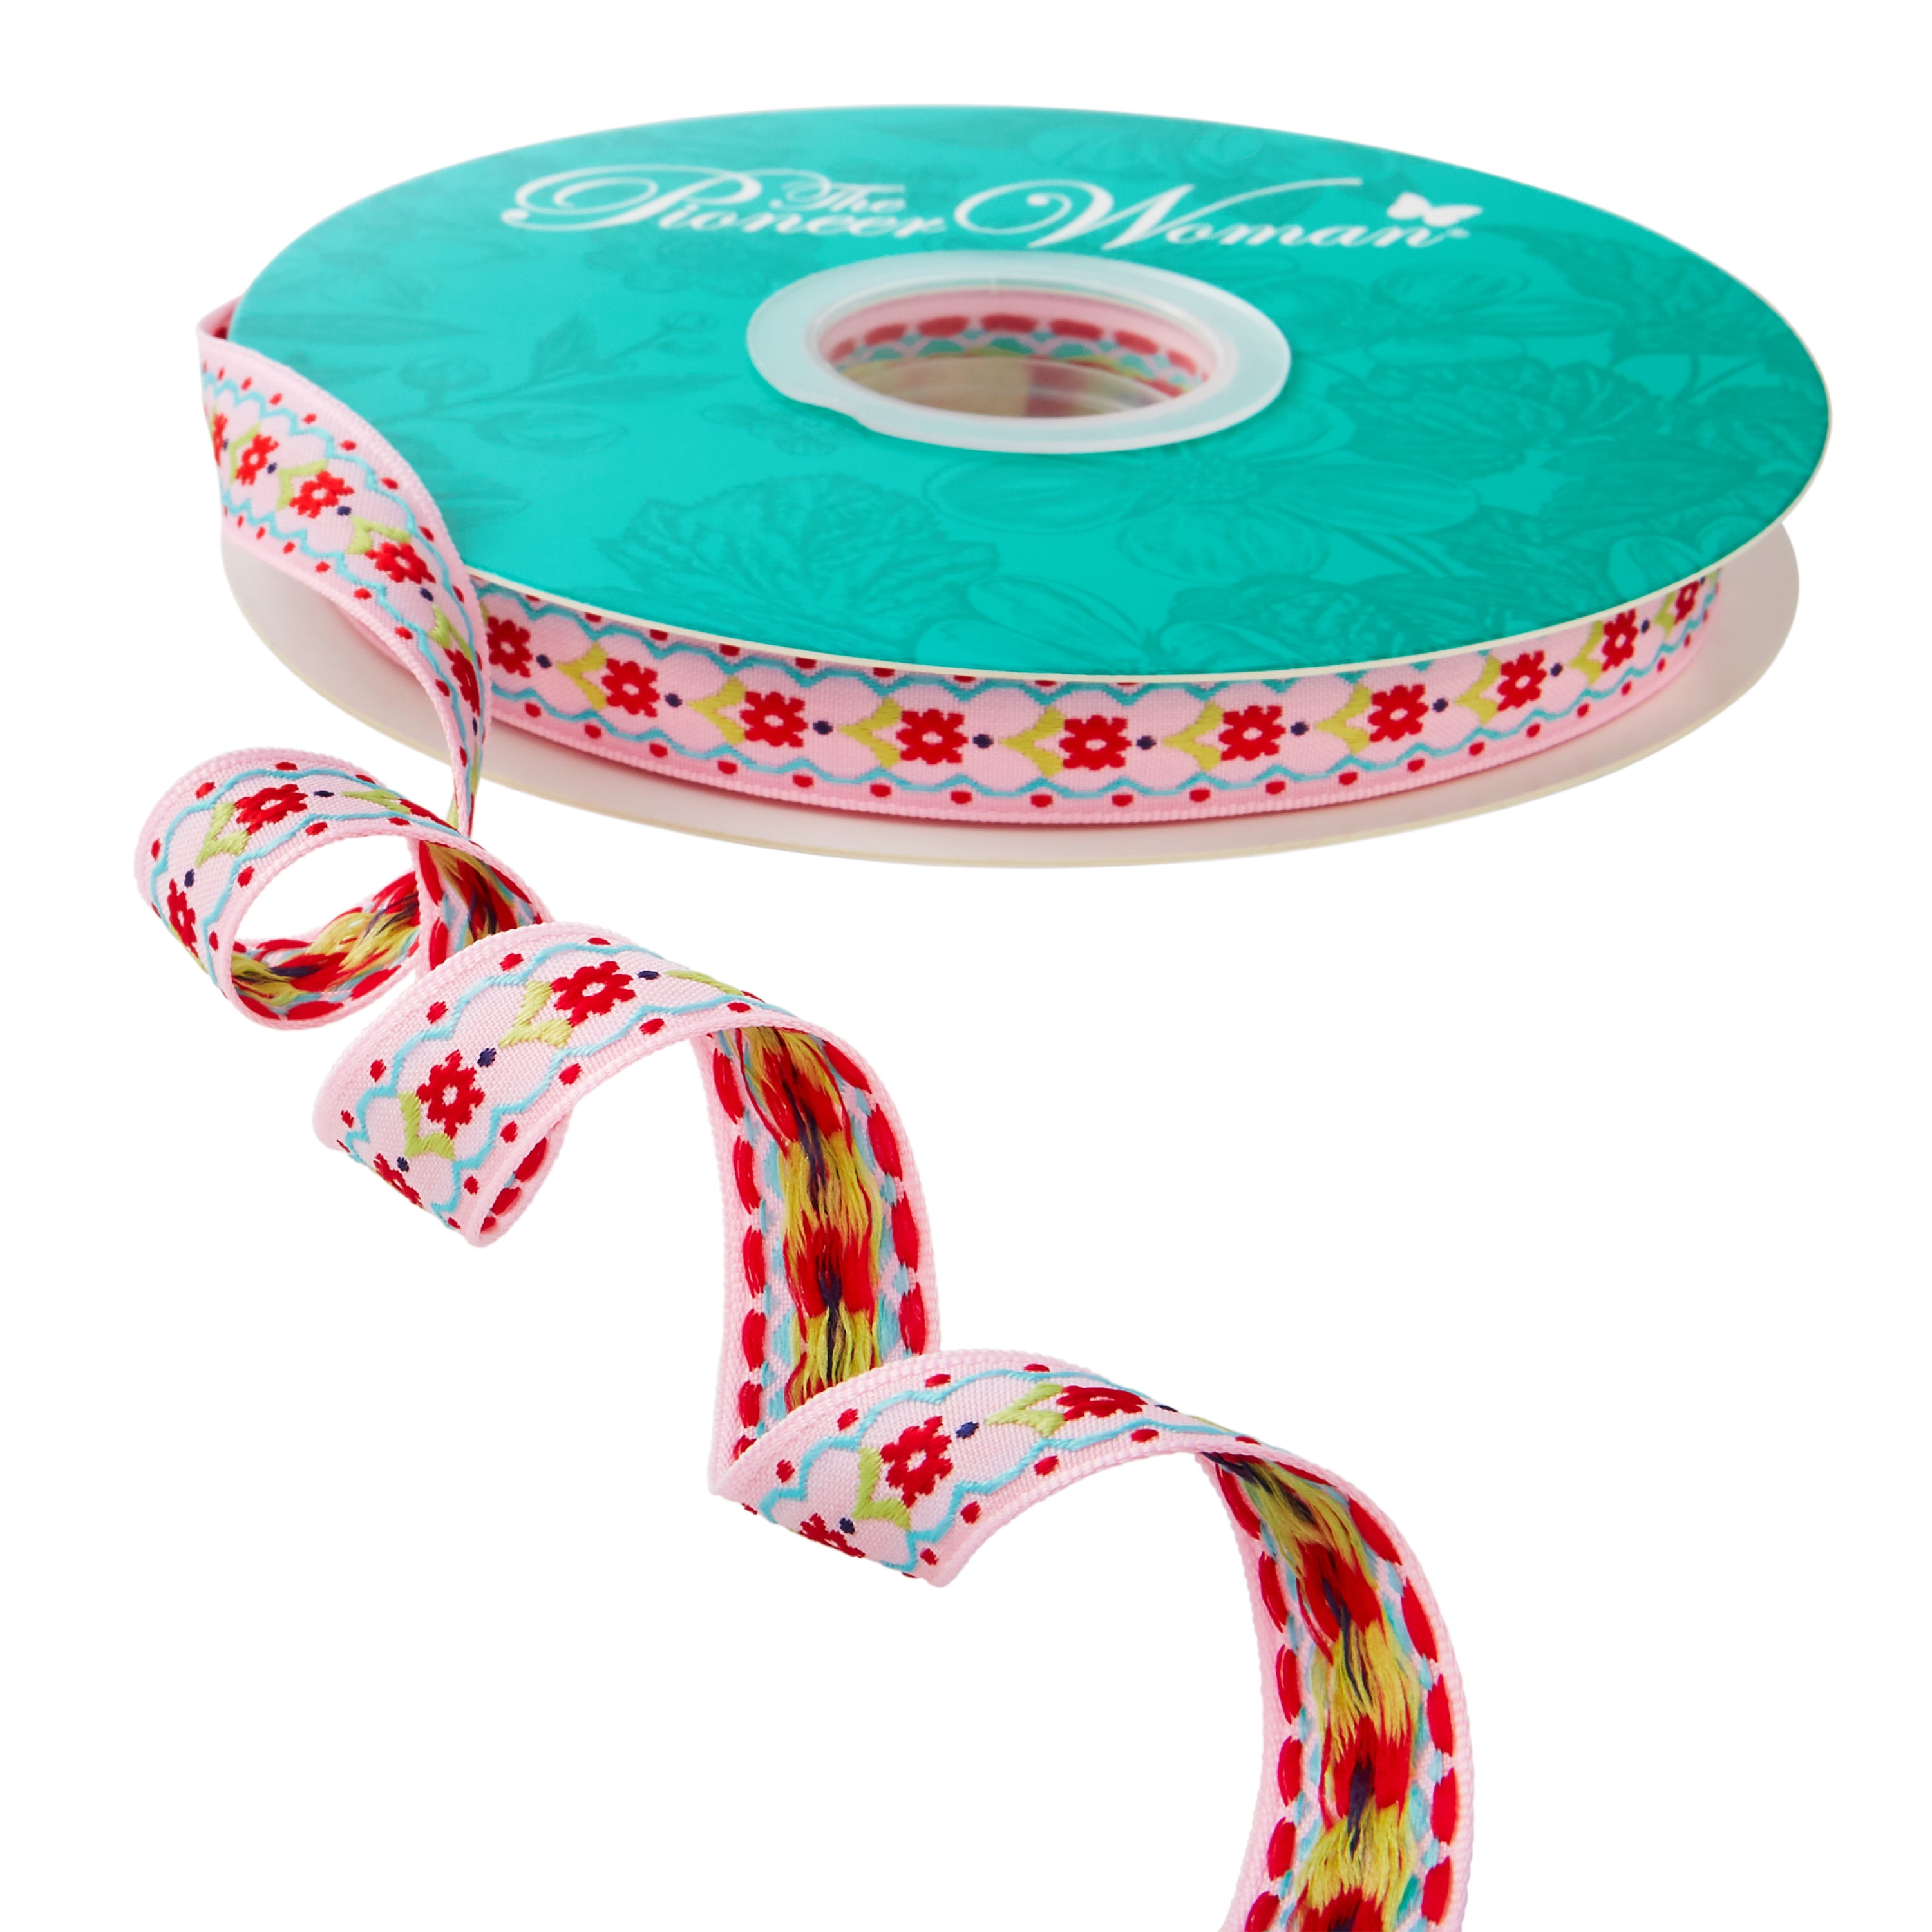 The Pioneer Woman Heritage Floral Polyester Merrow Wire Edge Ribbon, 2.5 inch x 25 Yards, Size: 2.5 inch Wide x 25 Yards